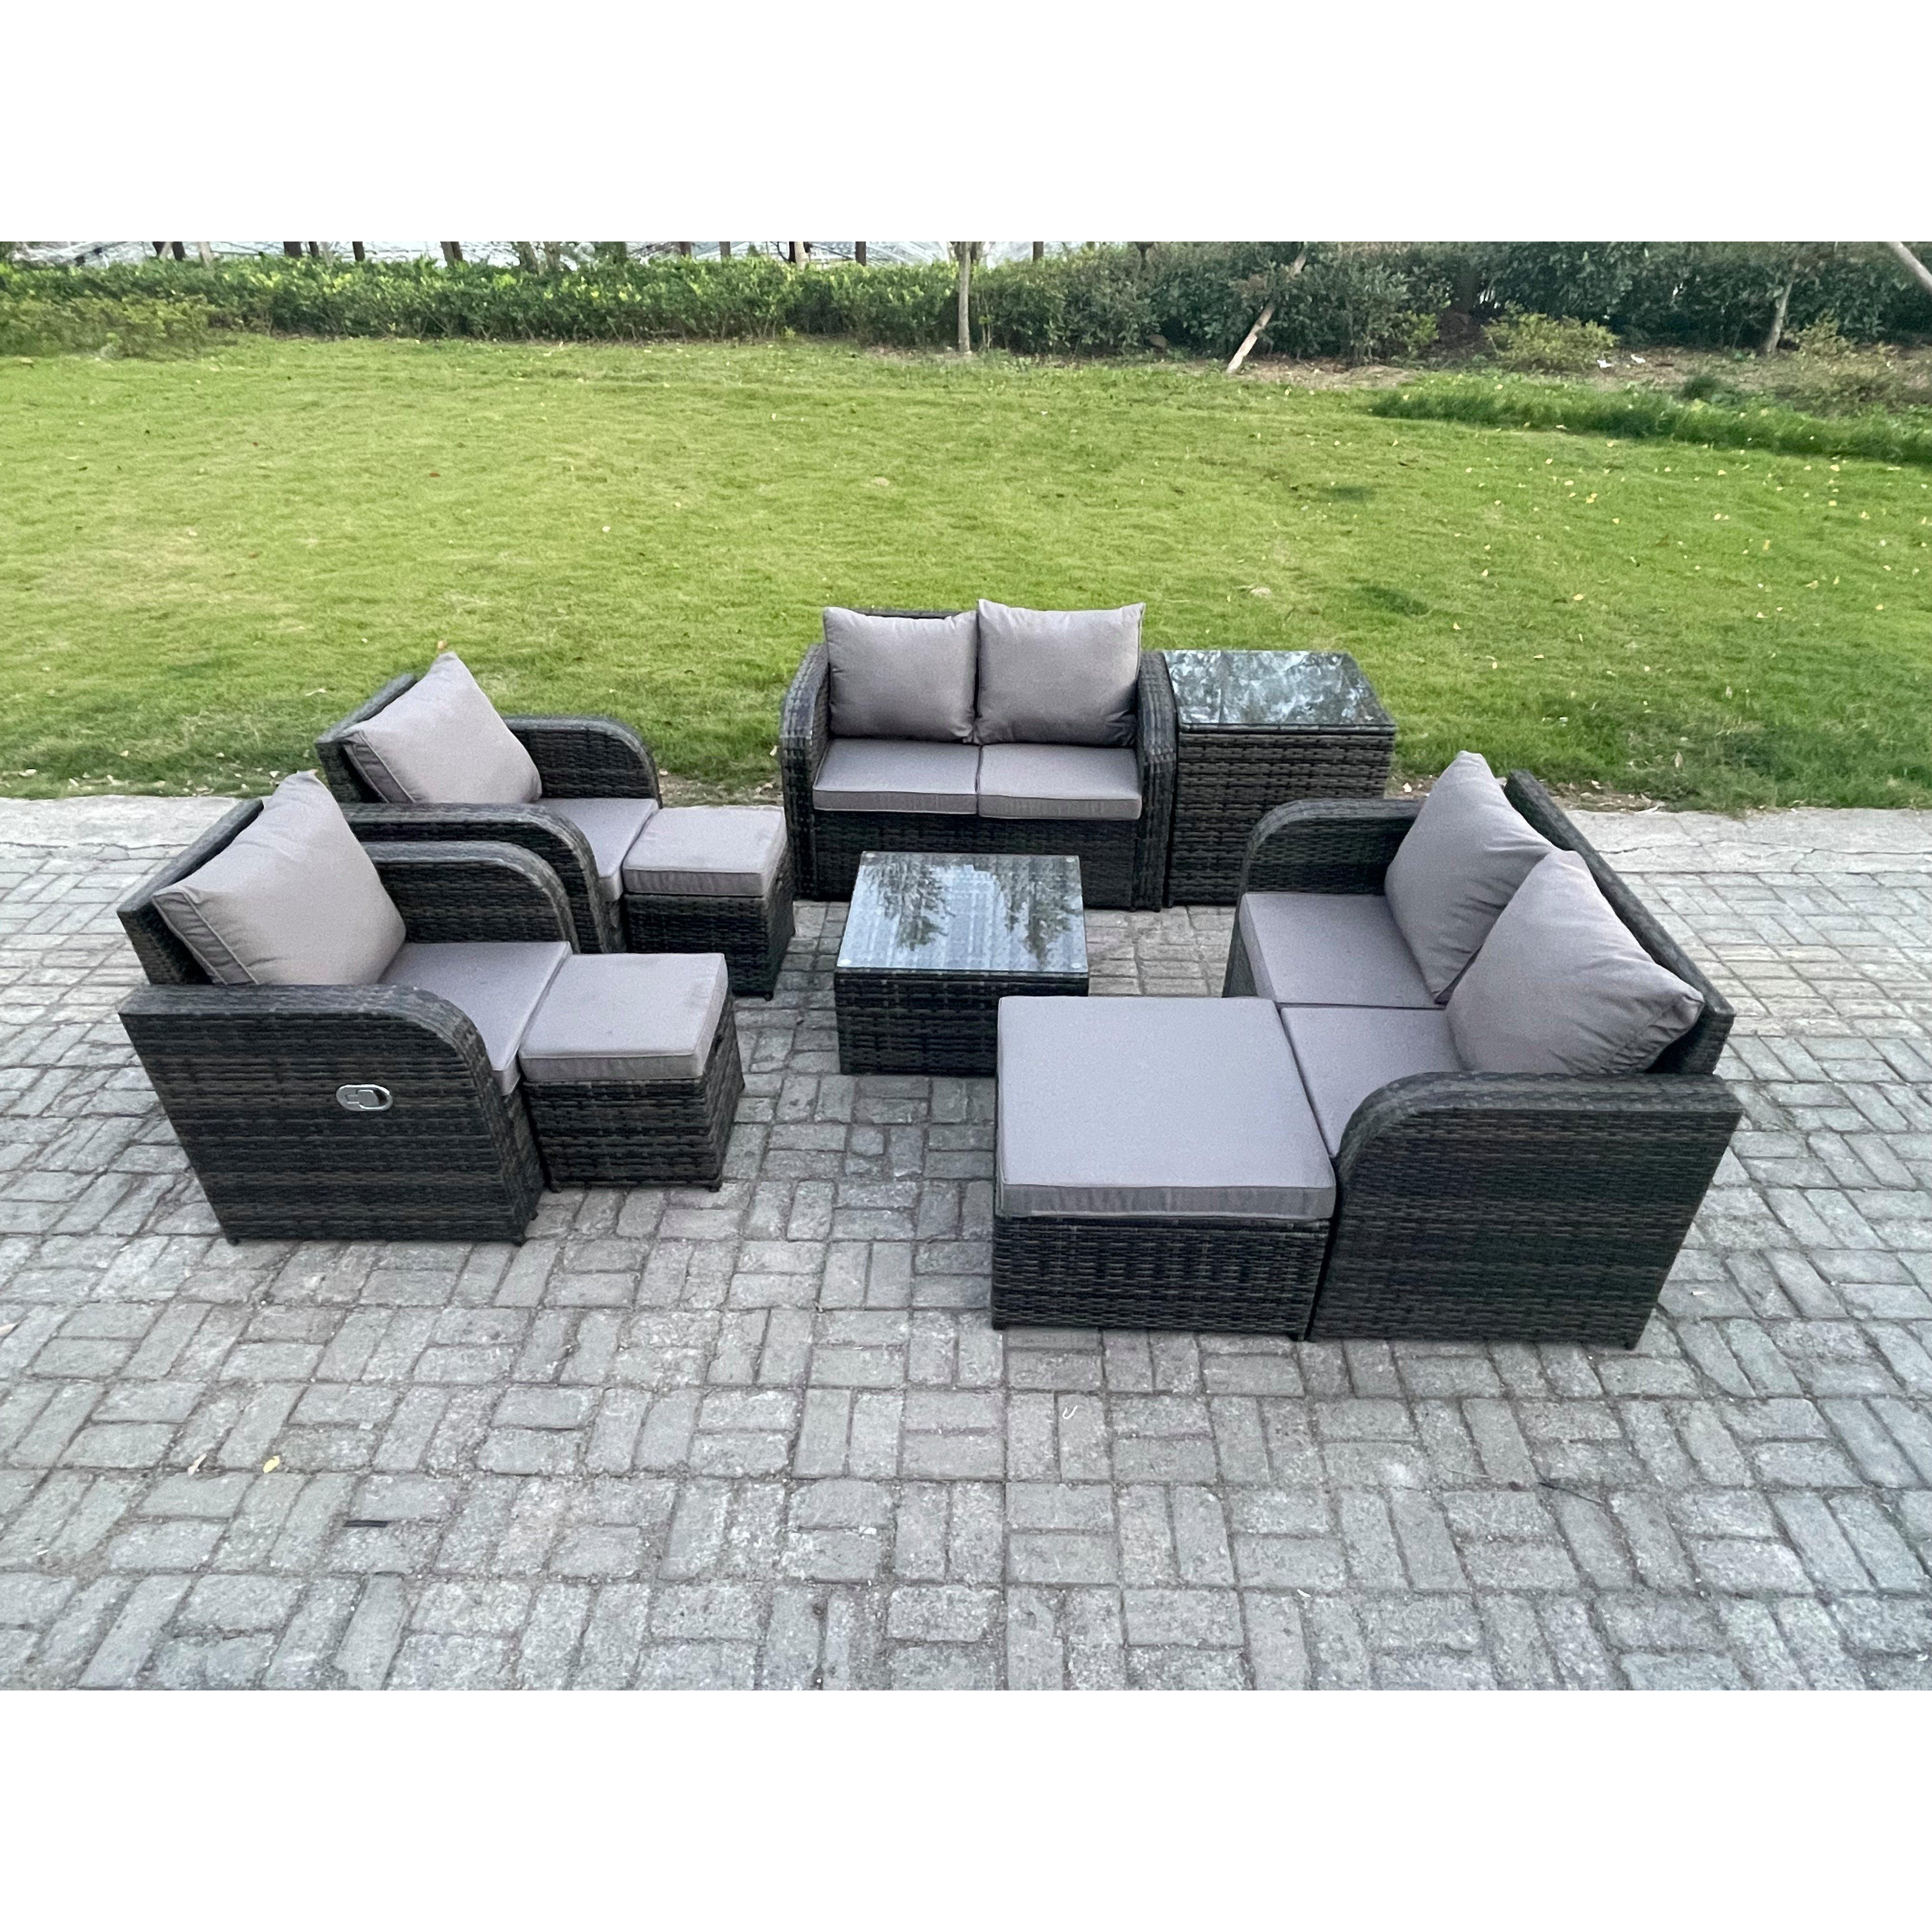 Garden Furniture Set Rattan Outdoor Lounge Sofa Chair With Tempered Glass Table 3 Footstools Side Table Dark Grey Mixed - image 1